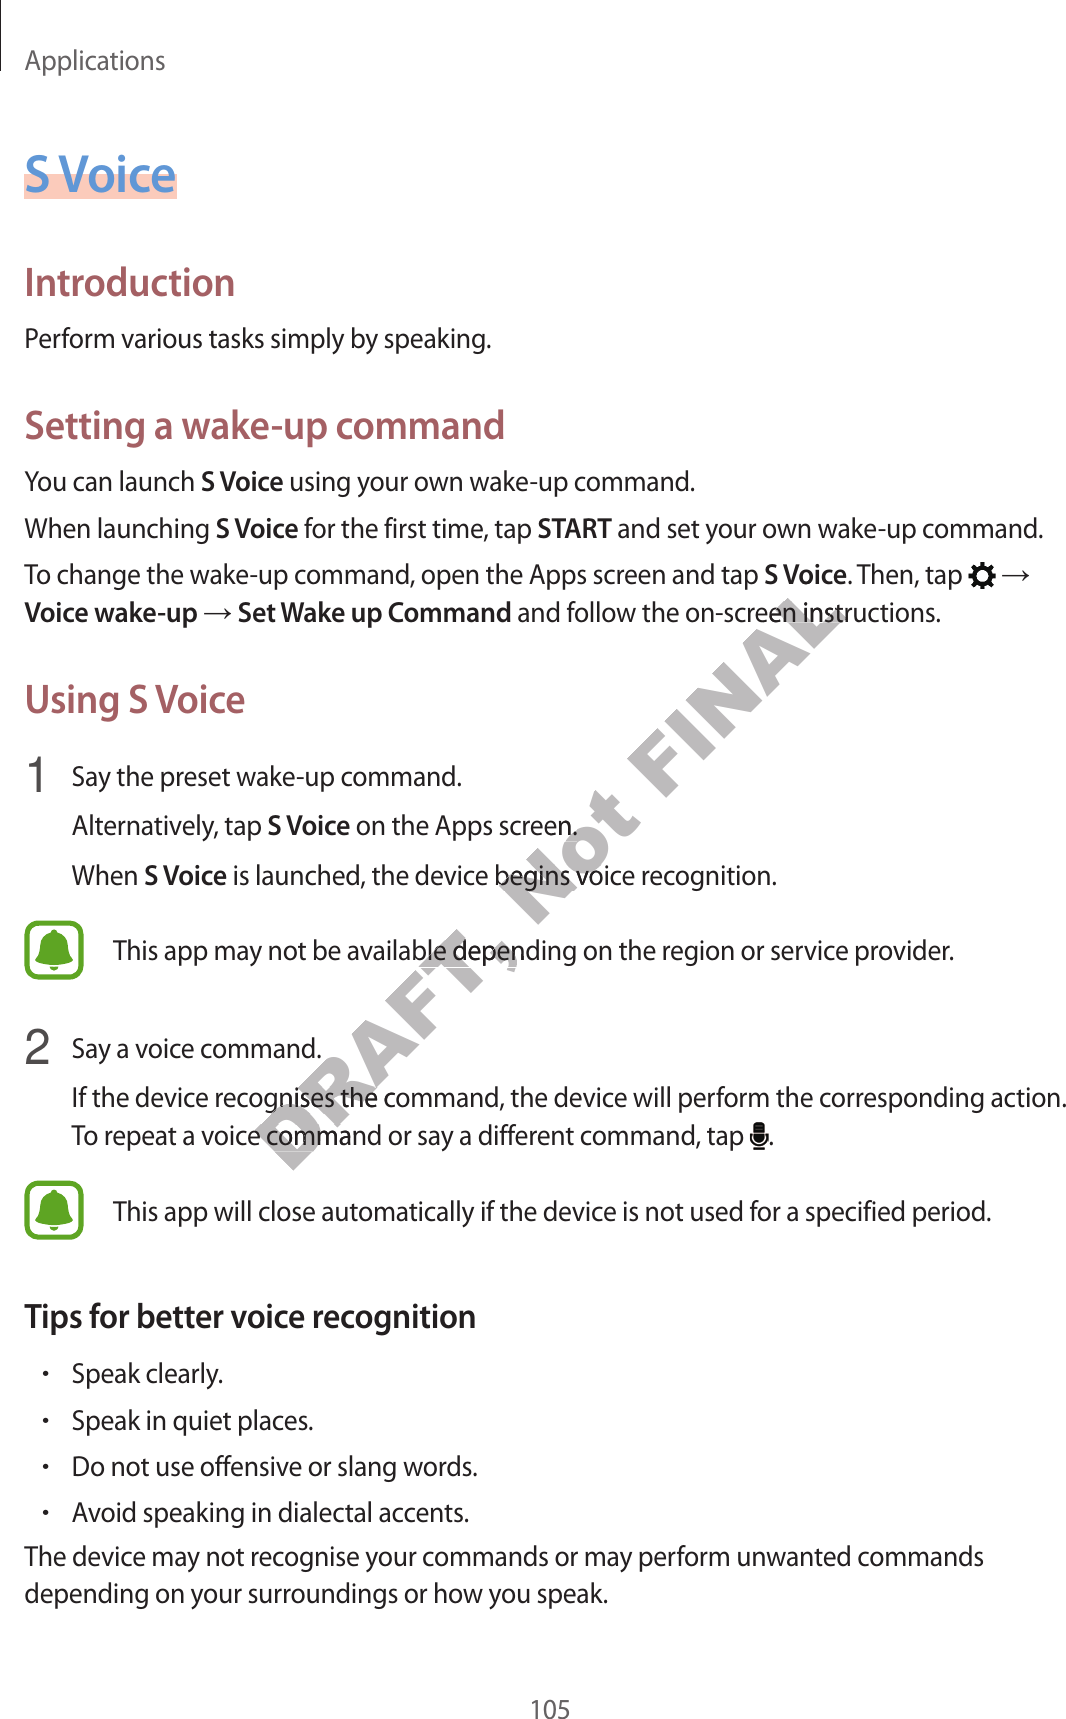 Applications105S VoiceIntroductionPerform various tasks simply by speaking.Setting a wake-up commandYou can launch S Voice using your own wake-up command.When launching S Voice for the first time, tap START and set your own wake-up command.To change the wake-up command, open the Apps screen and tap S Voice. Then, tap    Voice wake-up  Set Wake up Command and follow the on-screen instructions.Using S Voice1  Say the preset wake-up command.Alternatively, tap S Voice on the Apps screen.When S Voice is launched, the device begins voice recognition.This app may not be available depending on the region or service provider.2  Say a voice command.If the device recognises the command, the device will perform the corresponding action. To repeat a voice command or say a different command, tap  .This app will close automatically if the device is not used for a specified period.Tips for better voice recognition•Speak clearly.•Speak in quiet places.•Do not use offensive or slang words.•Avoid speaking in dialectal accents.The device may not recognise your commands or may perform unwanted commands depending on your surroundings or how you speak.DRAFT, ailable depending on the railable depending on the rommand.ommand.ognises the commandognises the coice command or saoice command or saNot pps screen.een.e begins voice begins voicFINALS Voicw the on-screen instrucw the on-screen instruc